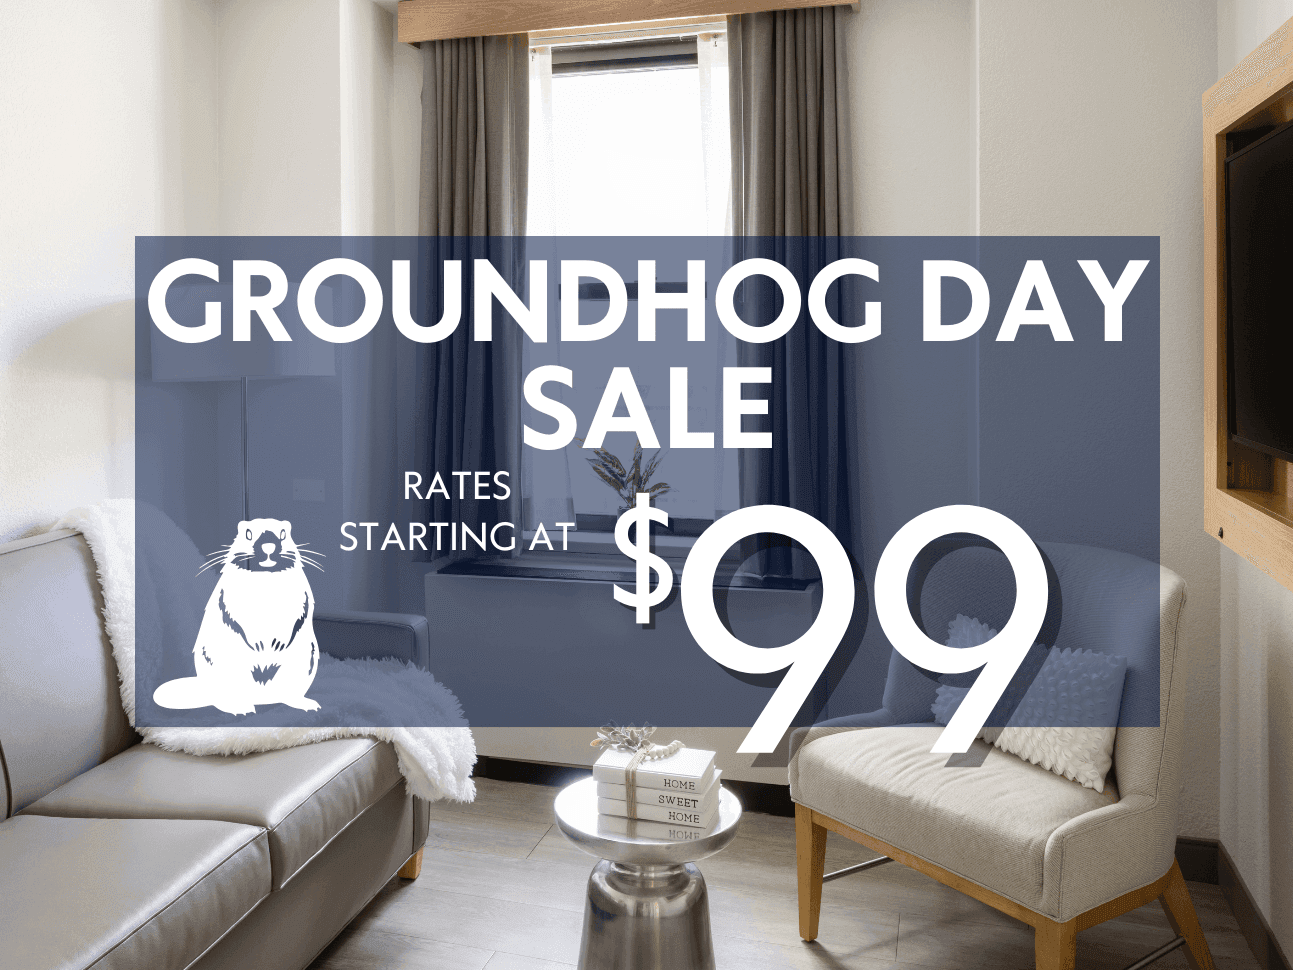 Groundhog Day Sale - Hotel Saint Clair - Rates Starting at $99